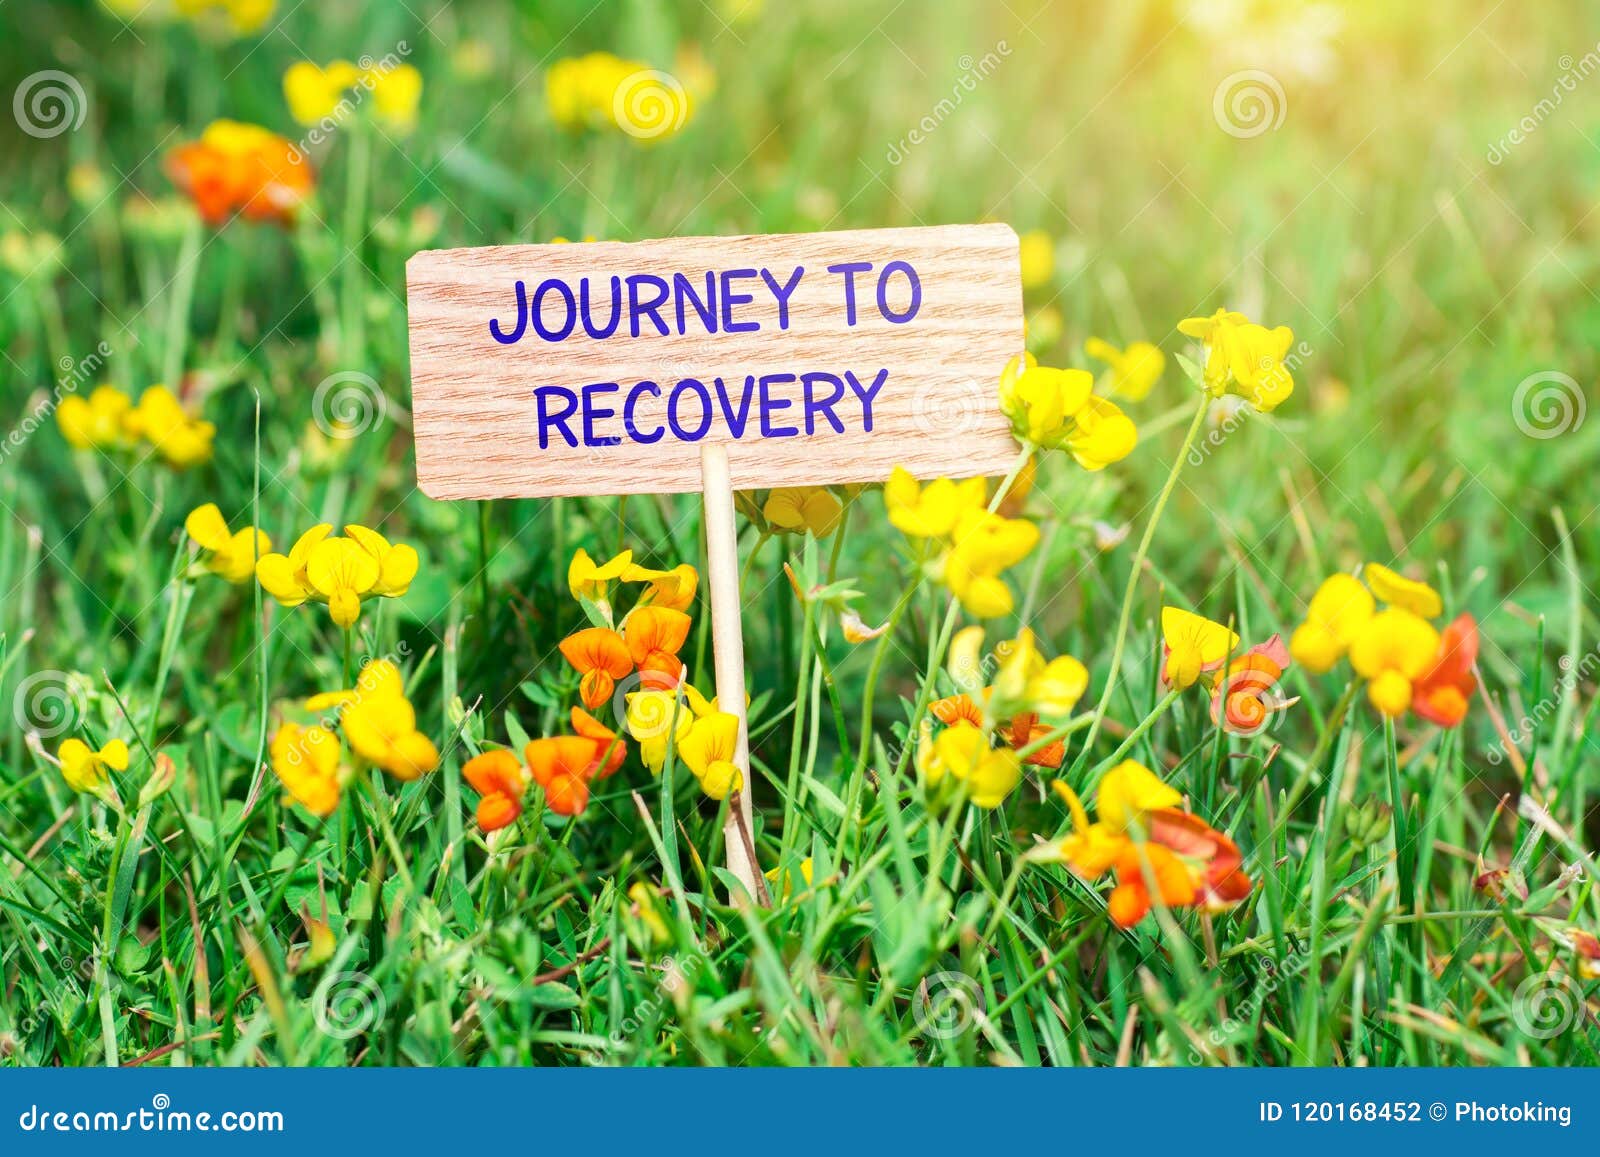 journey to recovery signboard